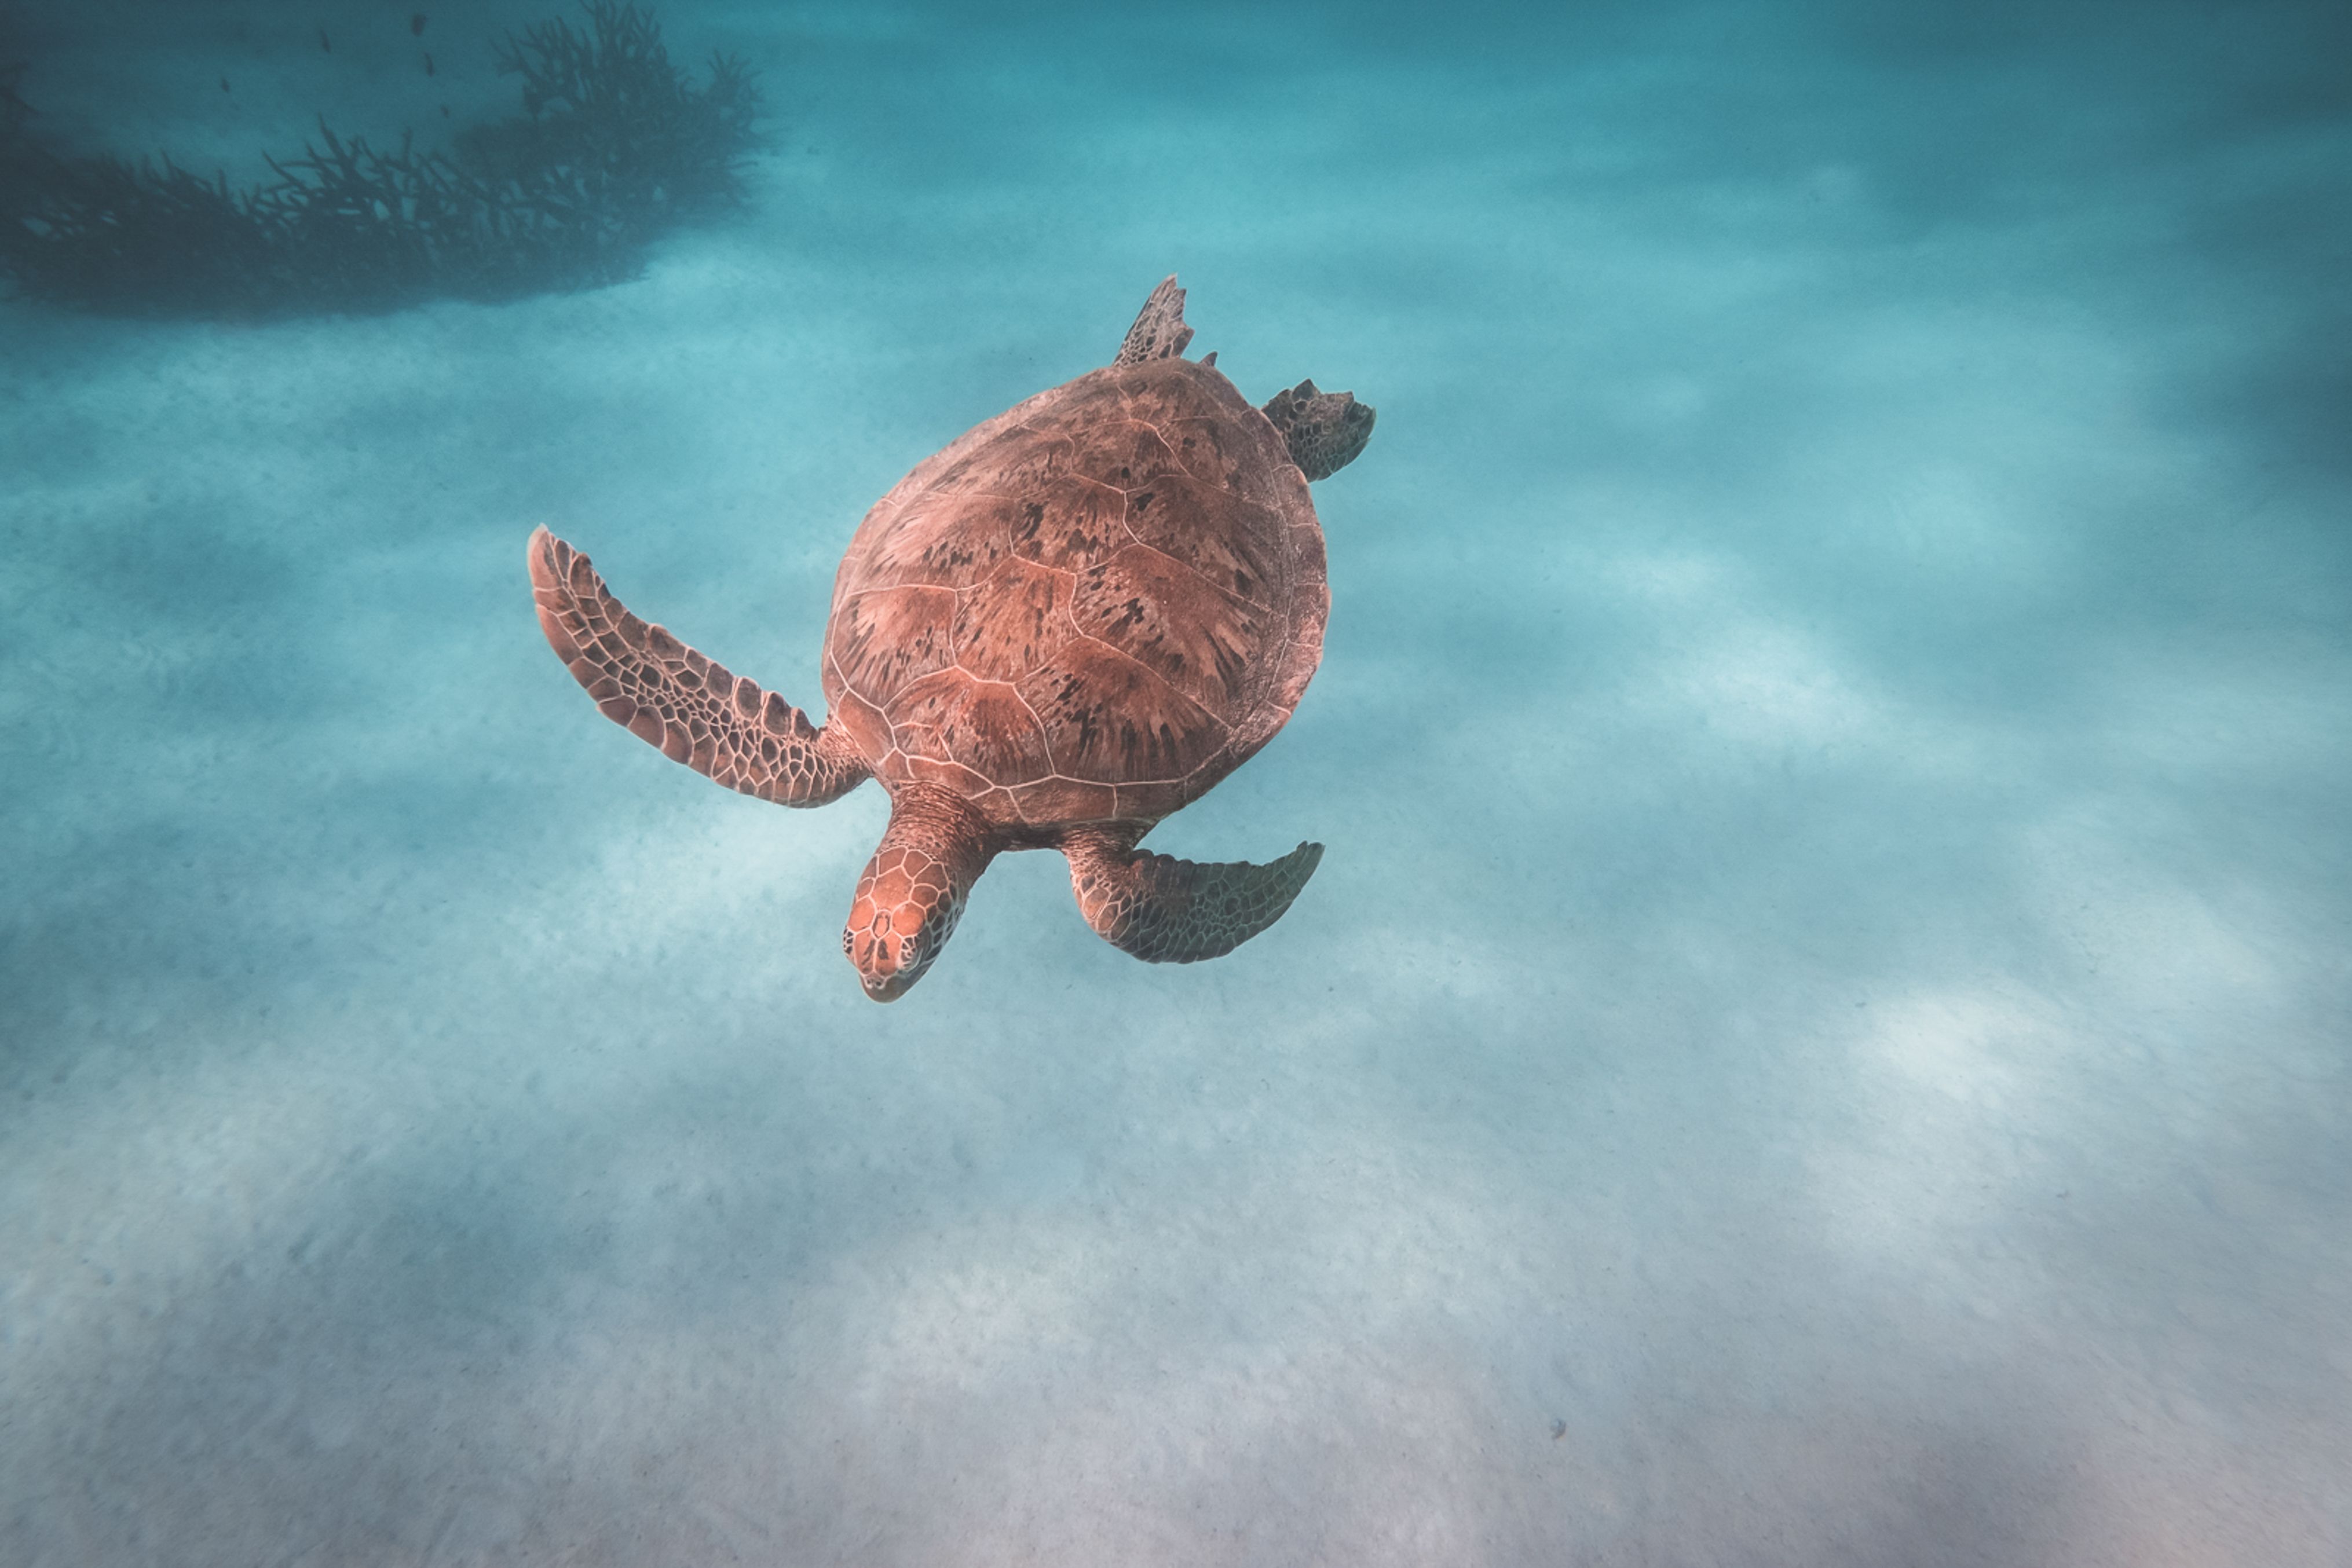 A turtle swimming in the ocean - Turtle